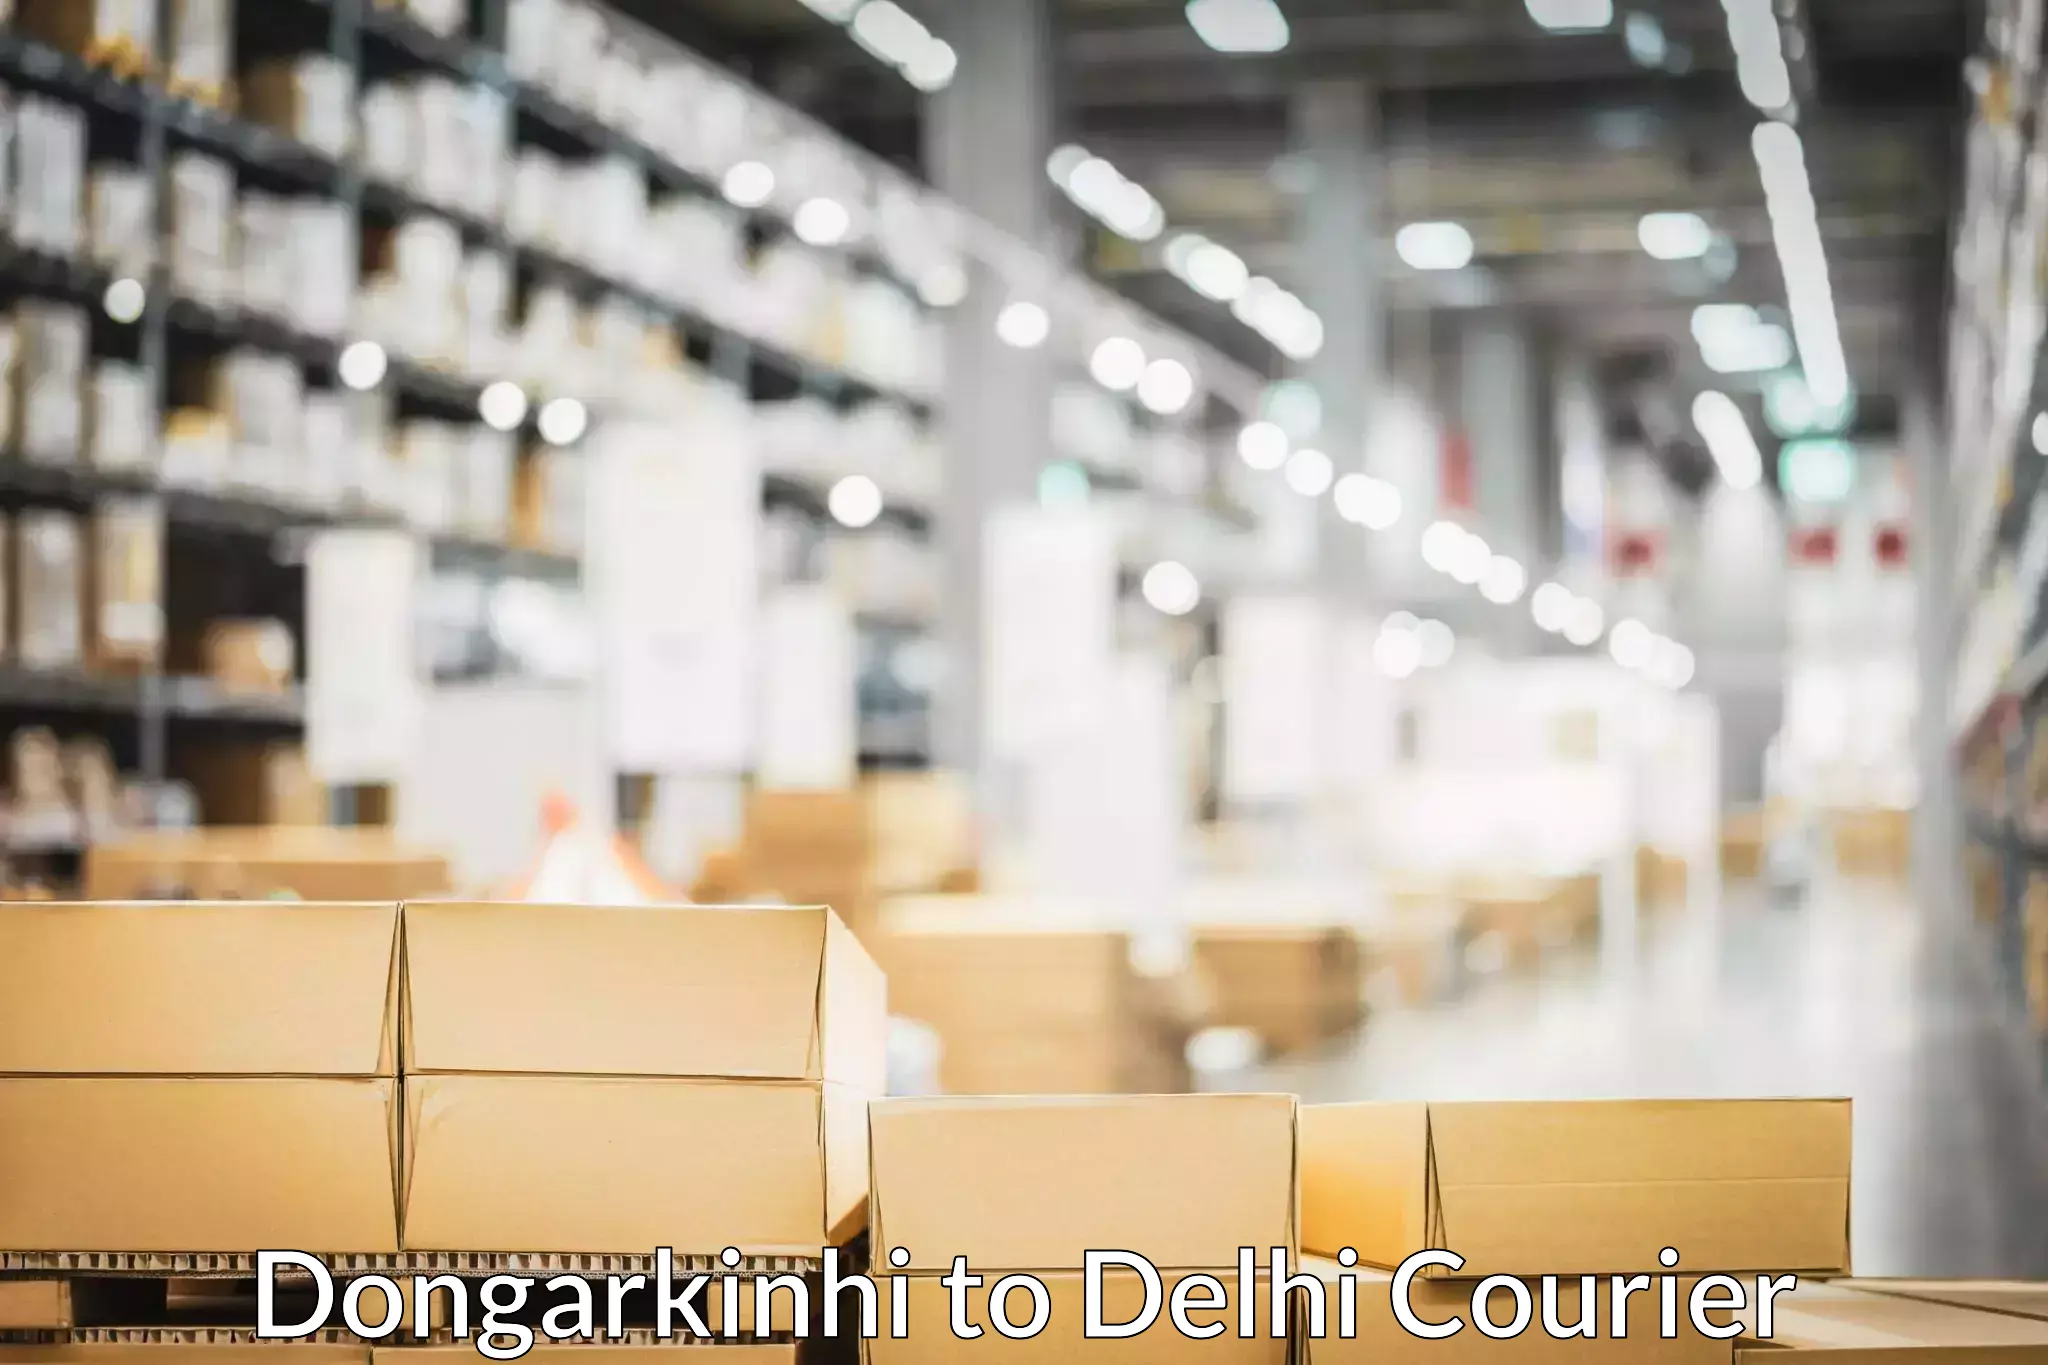 Home goods moving company Dongarkinhi to Delhi